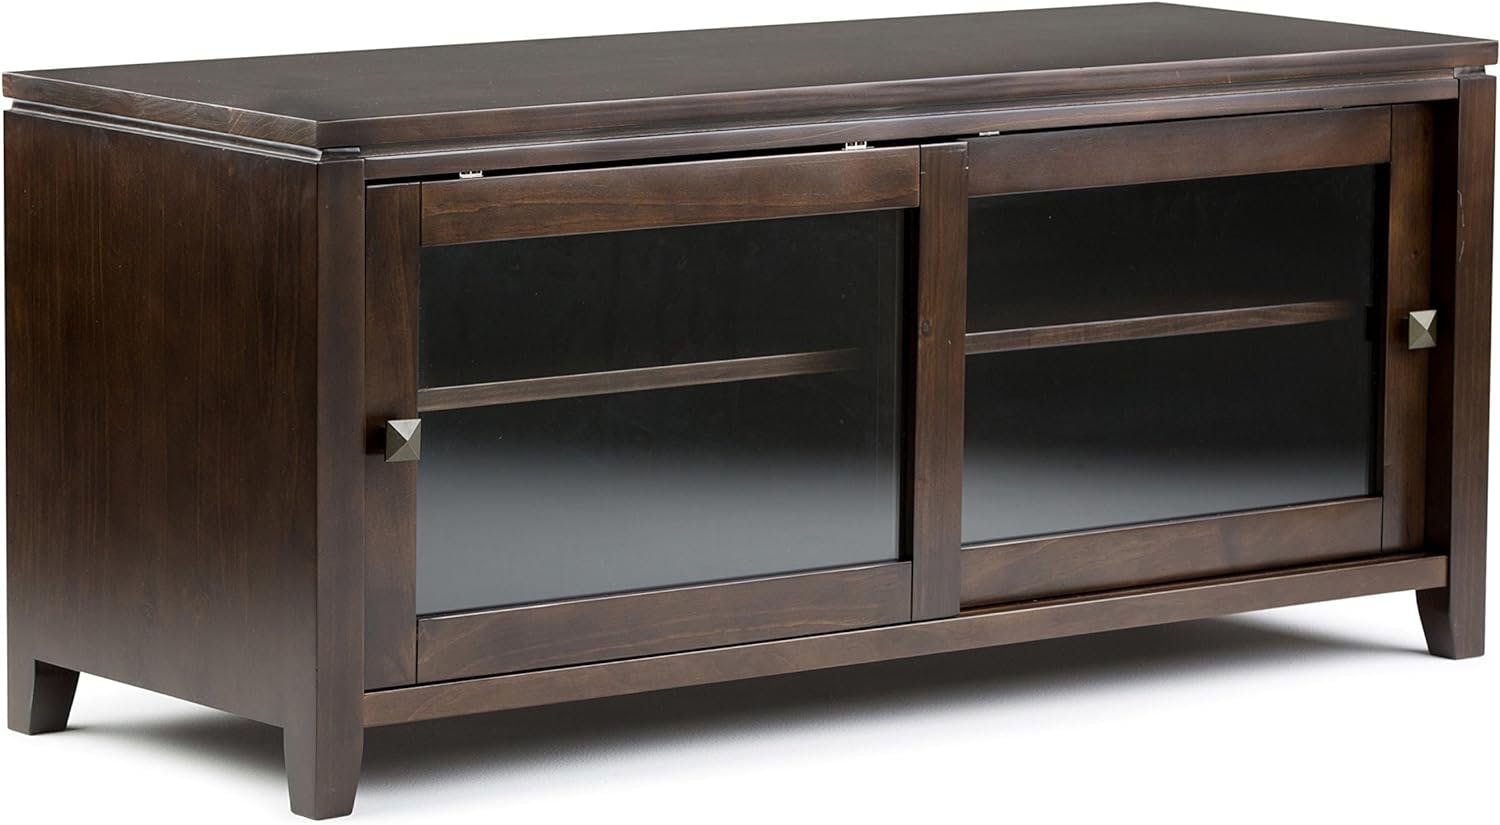 Cosmopolitan Mahogany Brown Solid Wood TV Stand with Cabinet